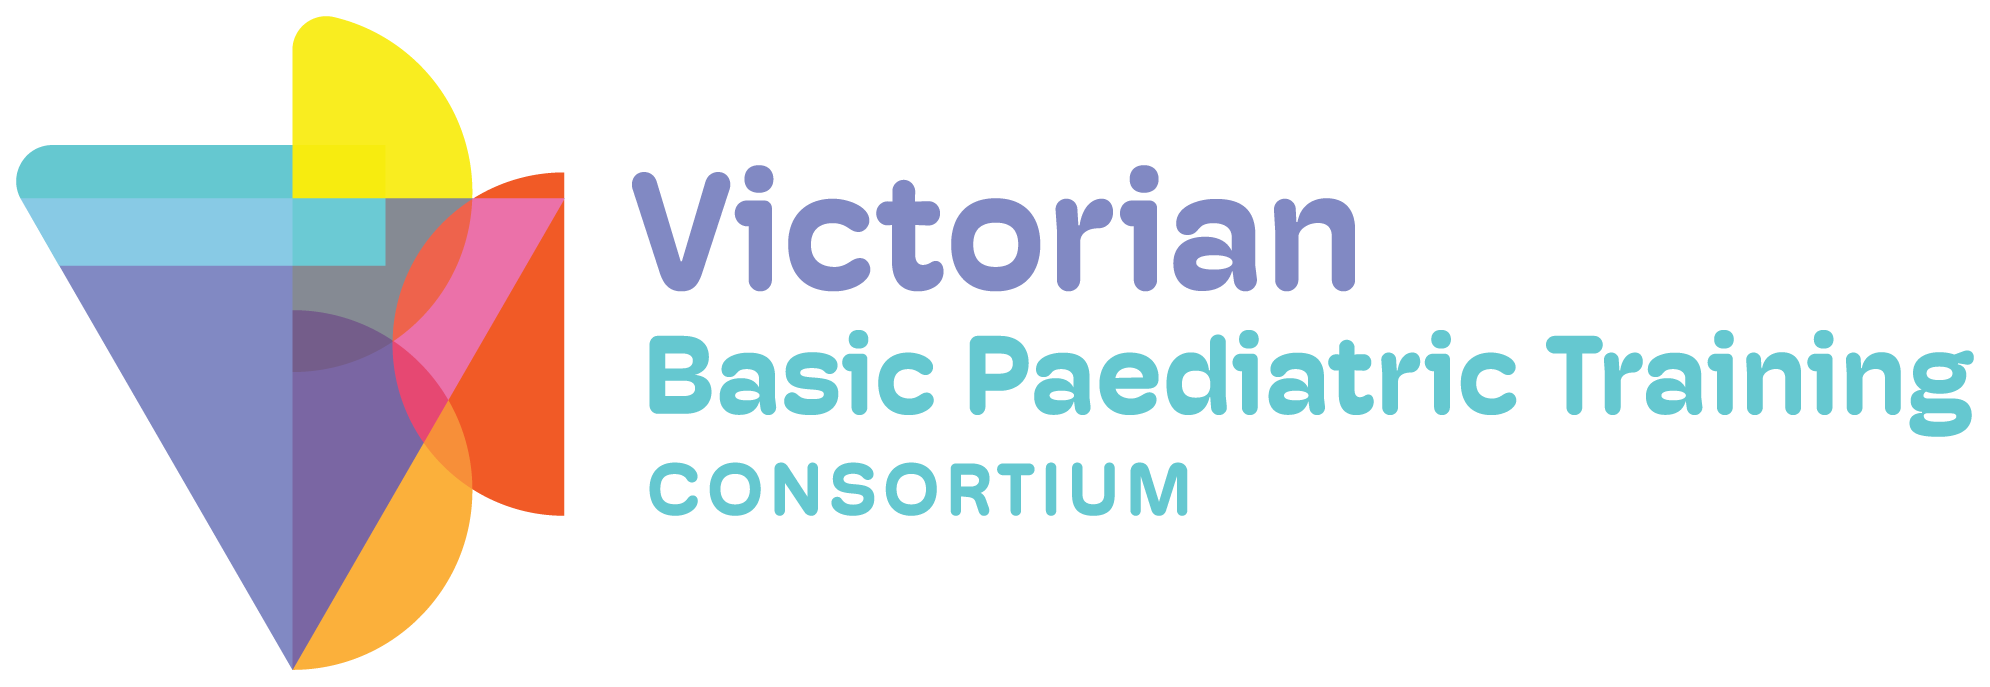 Vbptc_Primary_Logo_Full_Colour_RGB_2048px@72ppi-CROPPED.png